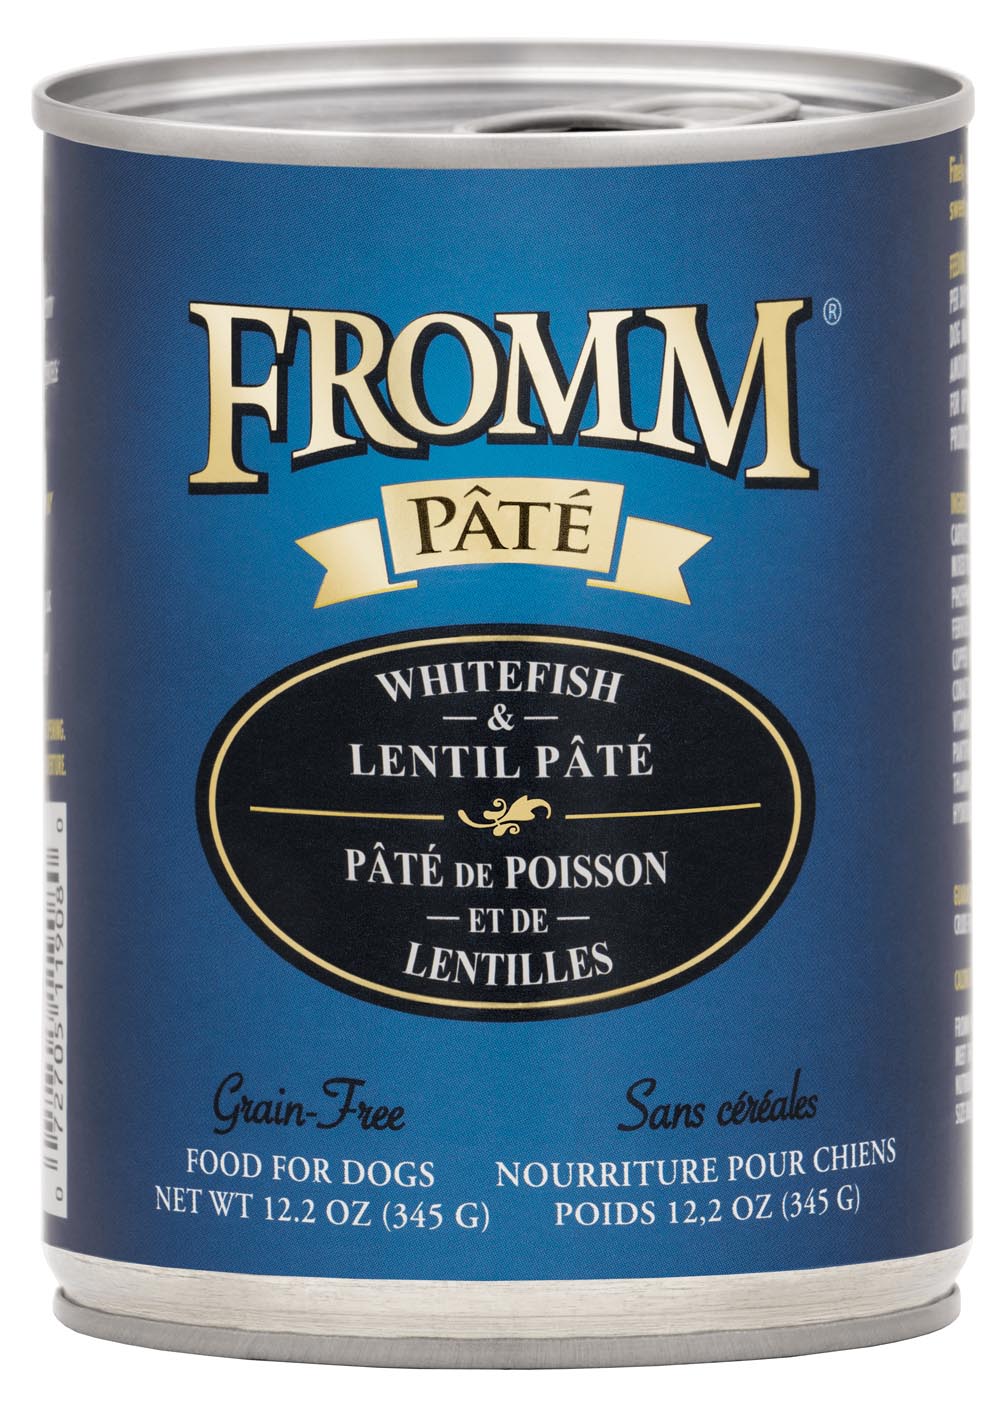 Fromm Gold Whitefish and Lentil Pate Canned Dog Food